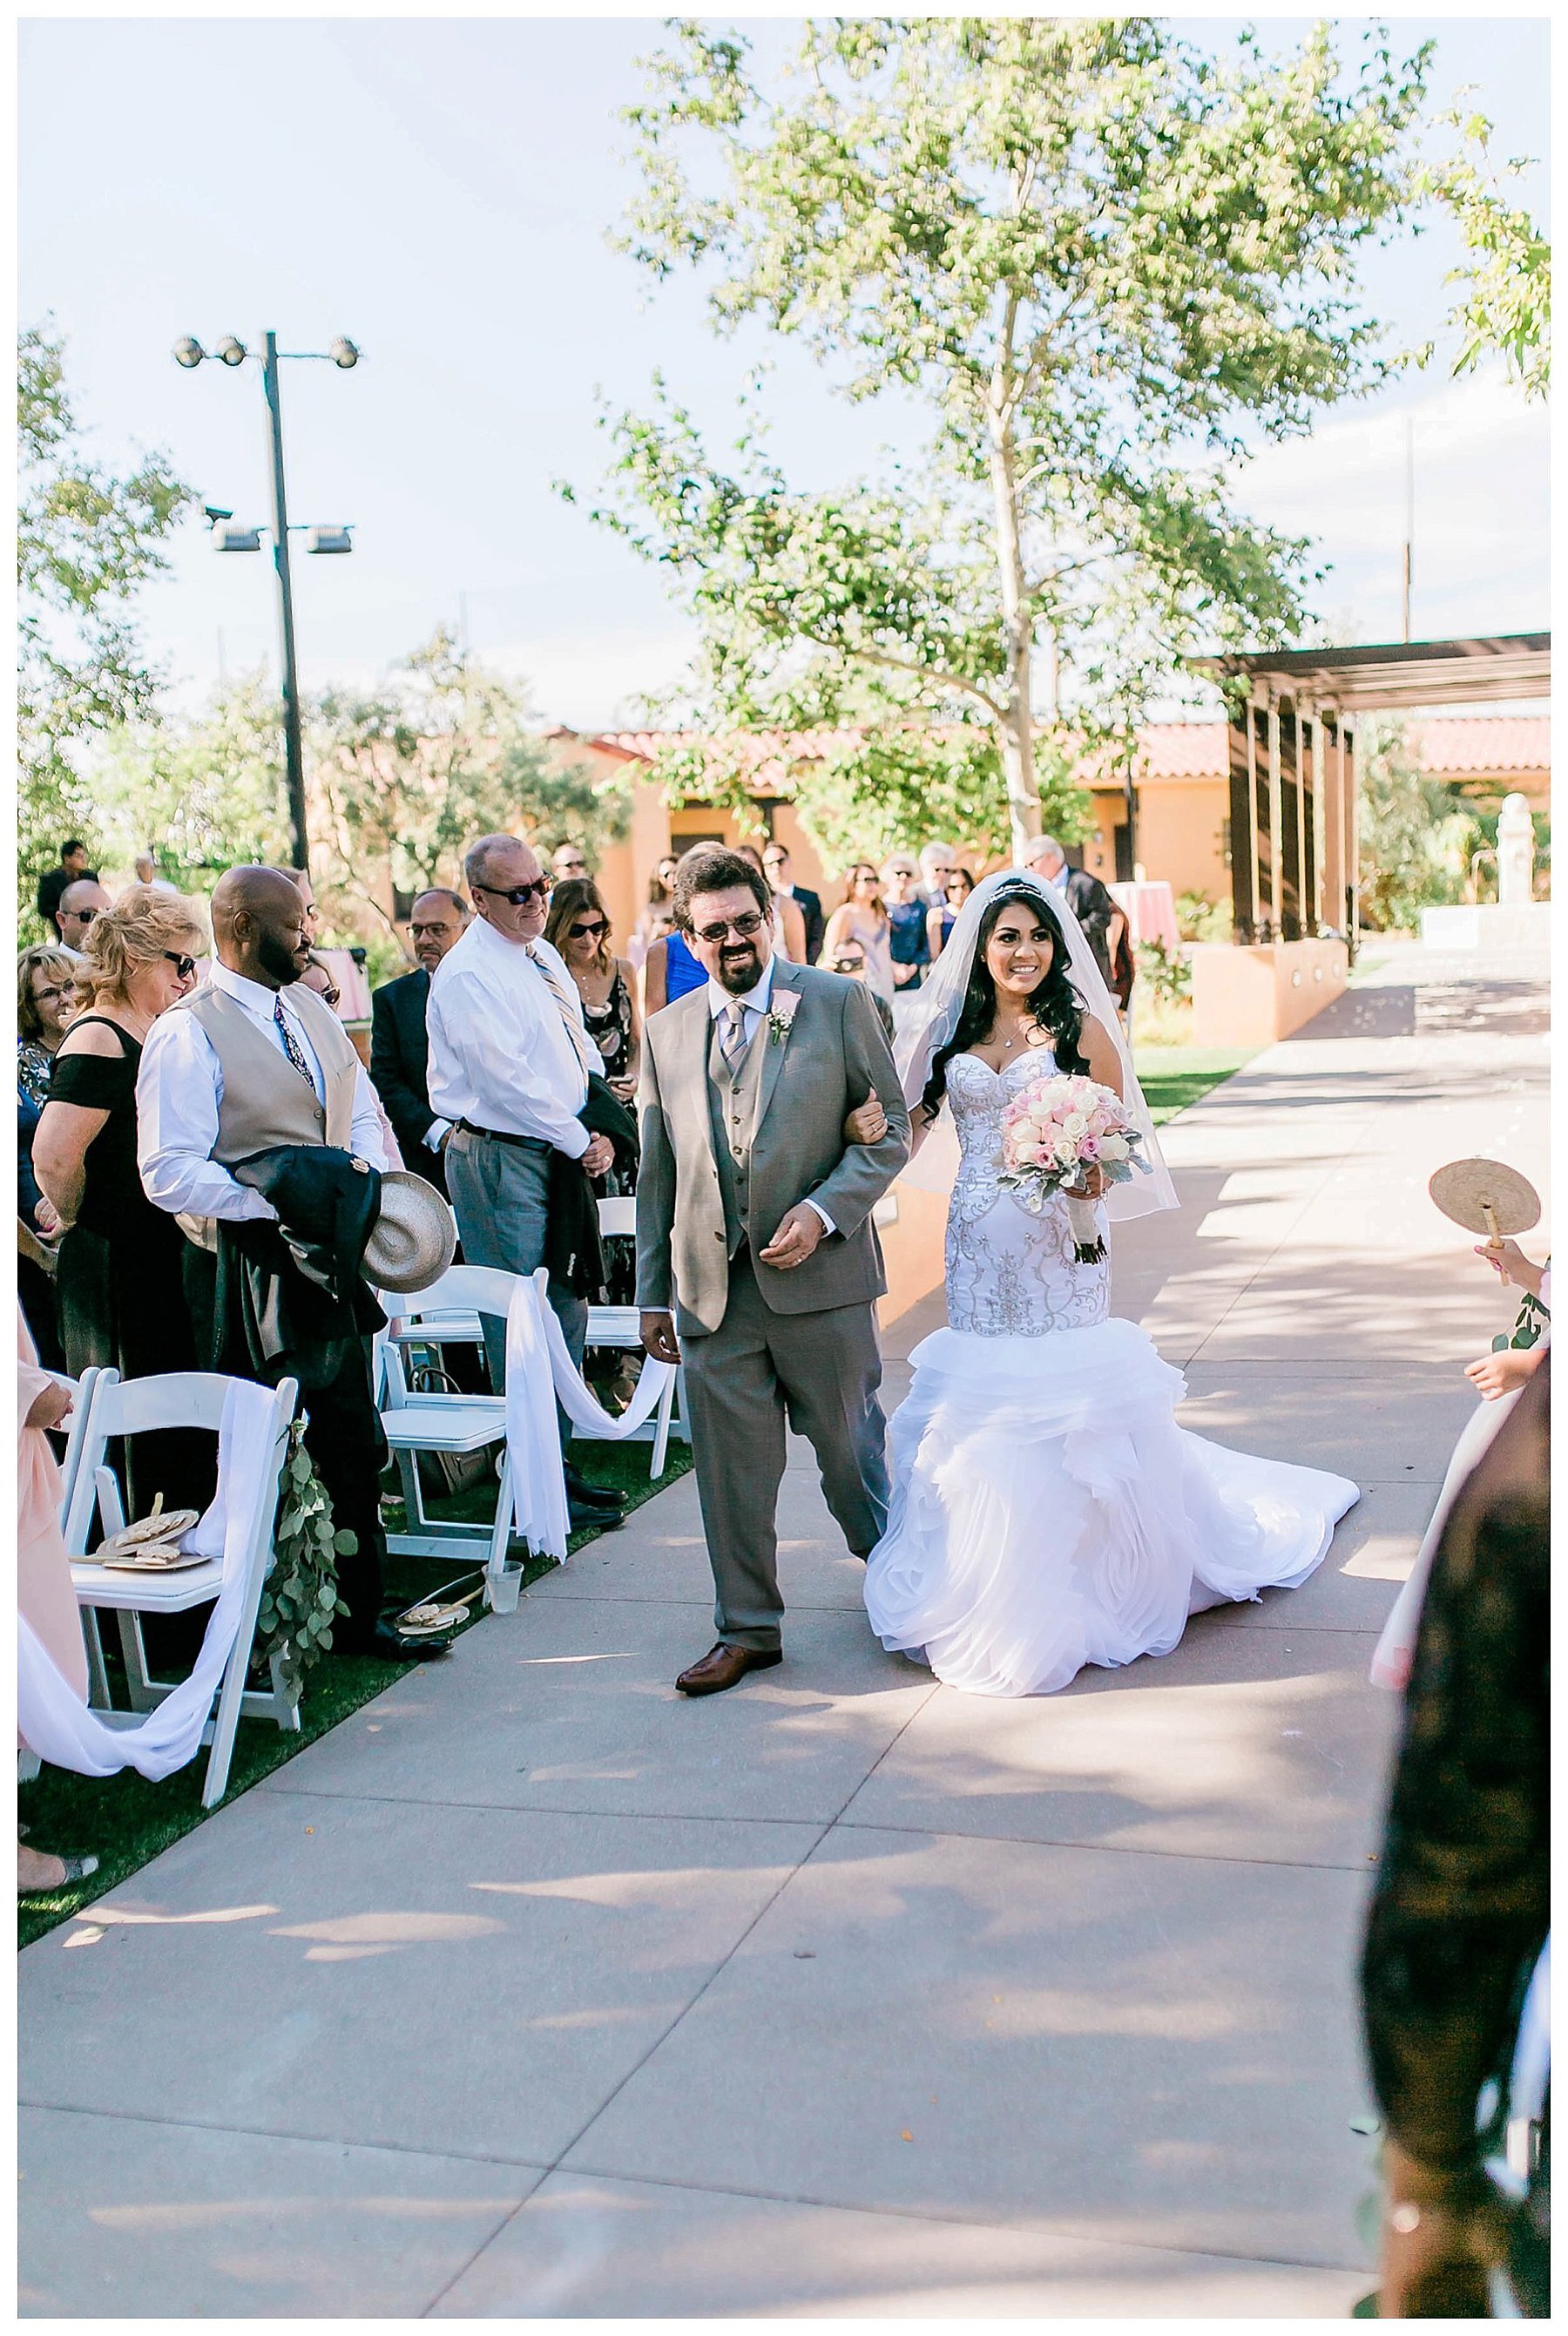  bride walks down the aisle on the arm of her father 